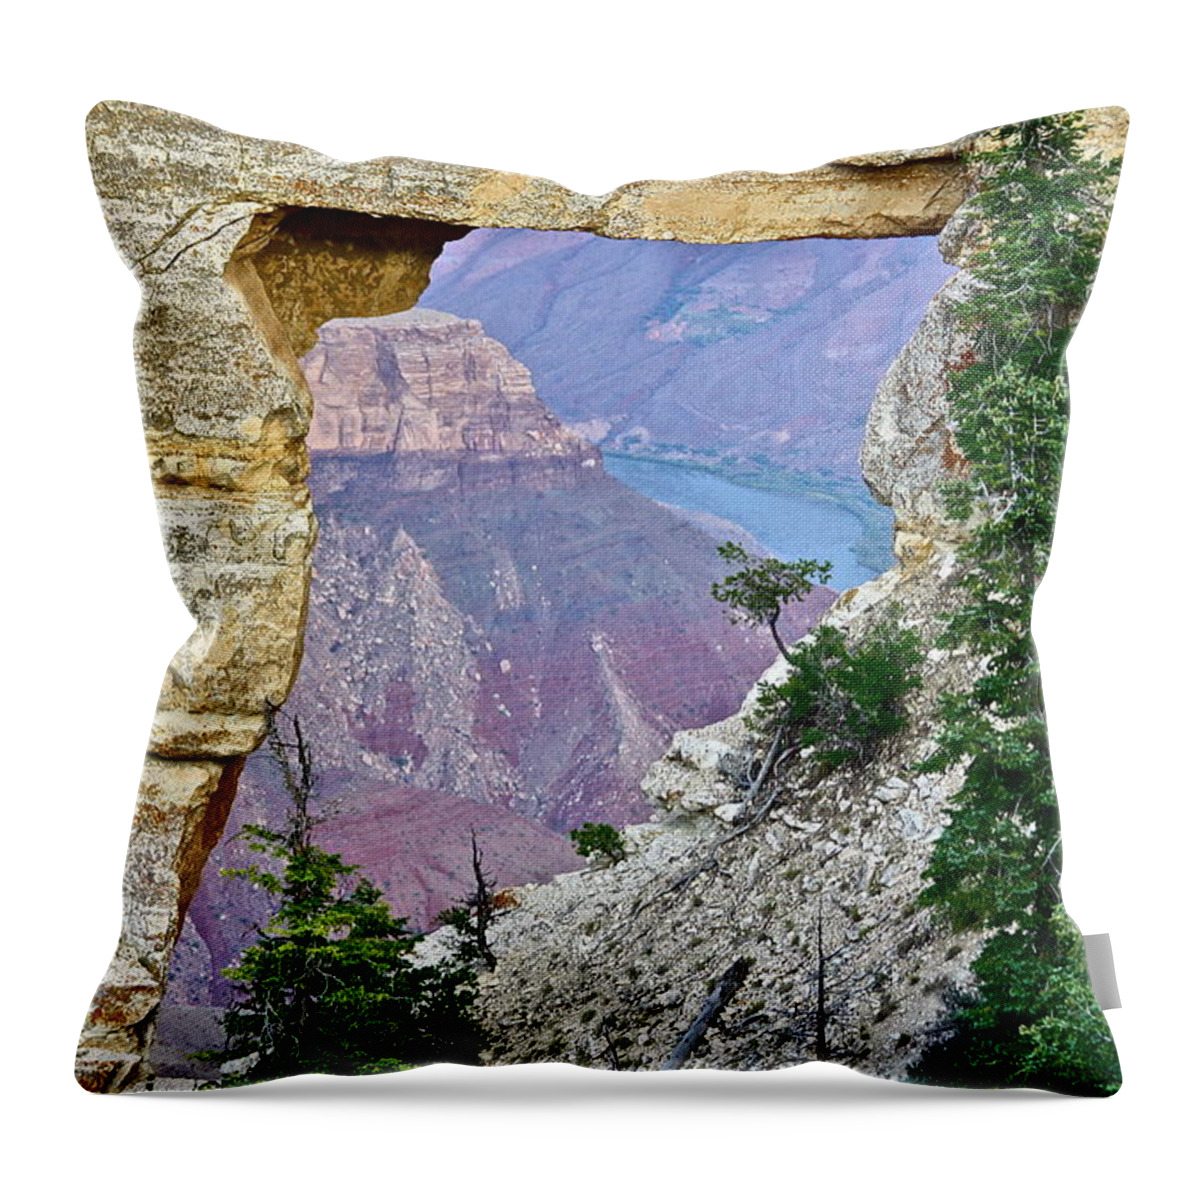 Grand Canyon Throw Pillow featuring the photograph Angel's Window Four by Diana Hatcher